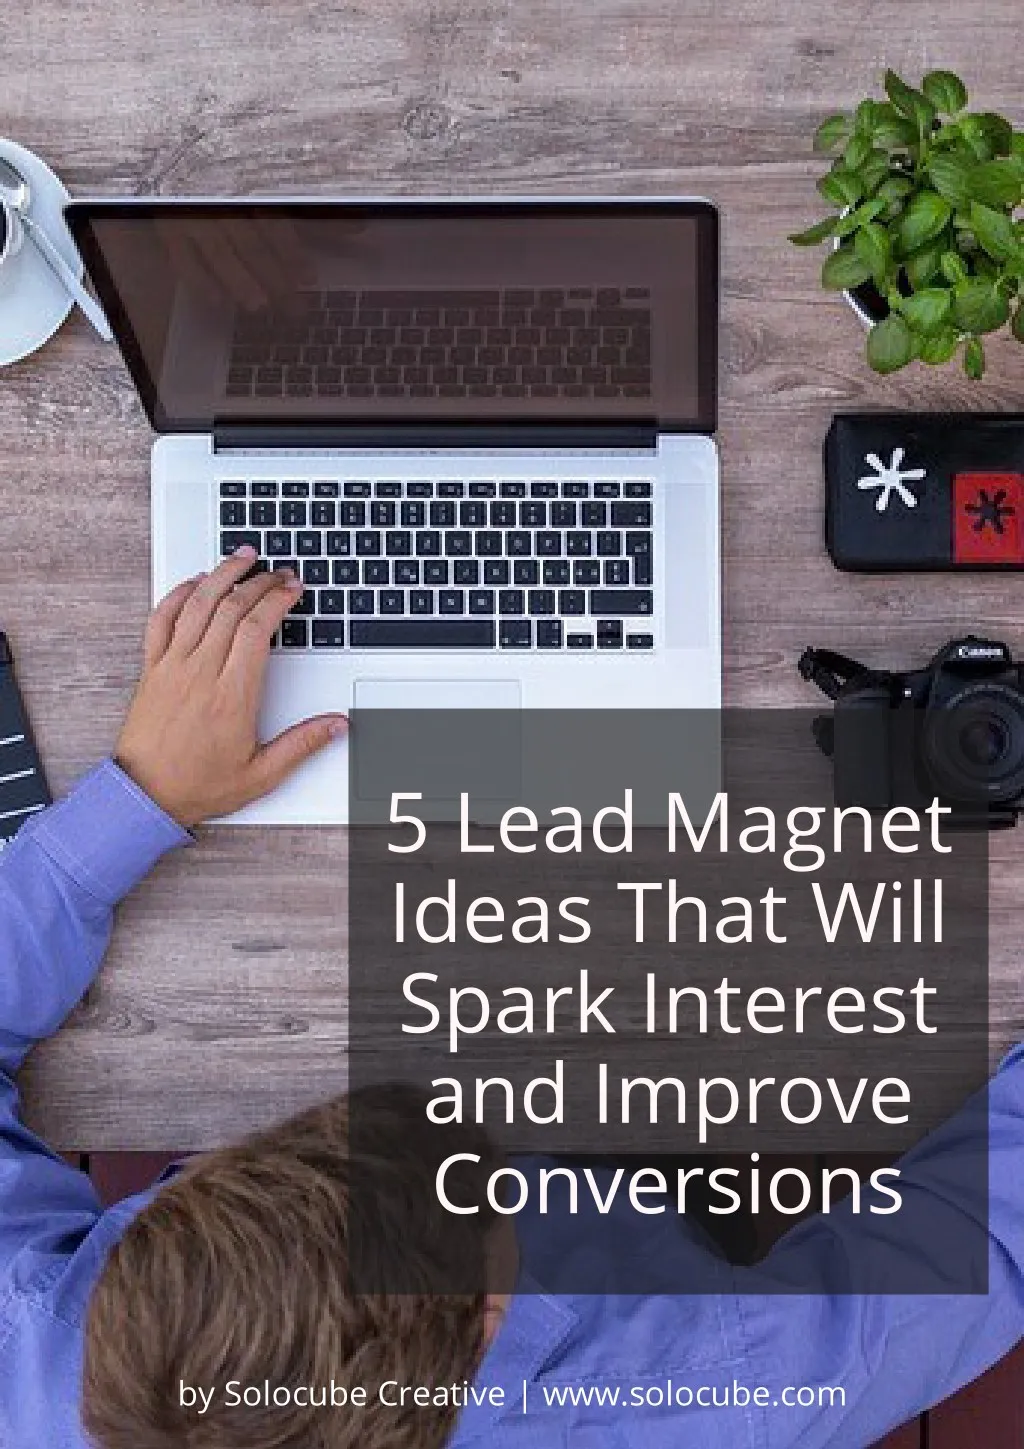 5 lead magnet ideas that will spark interest